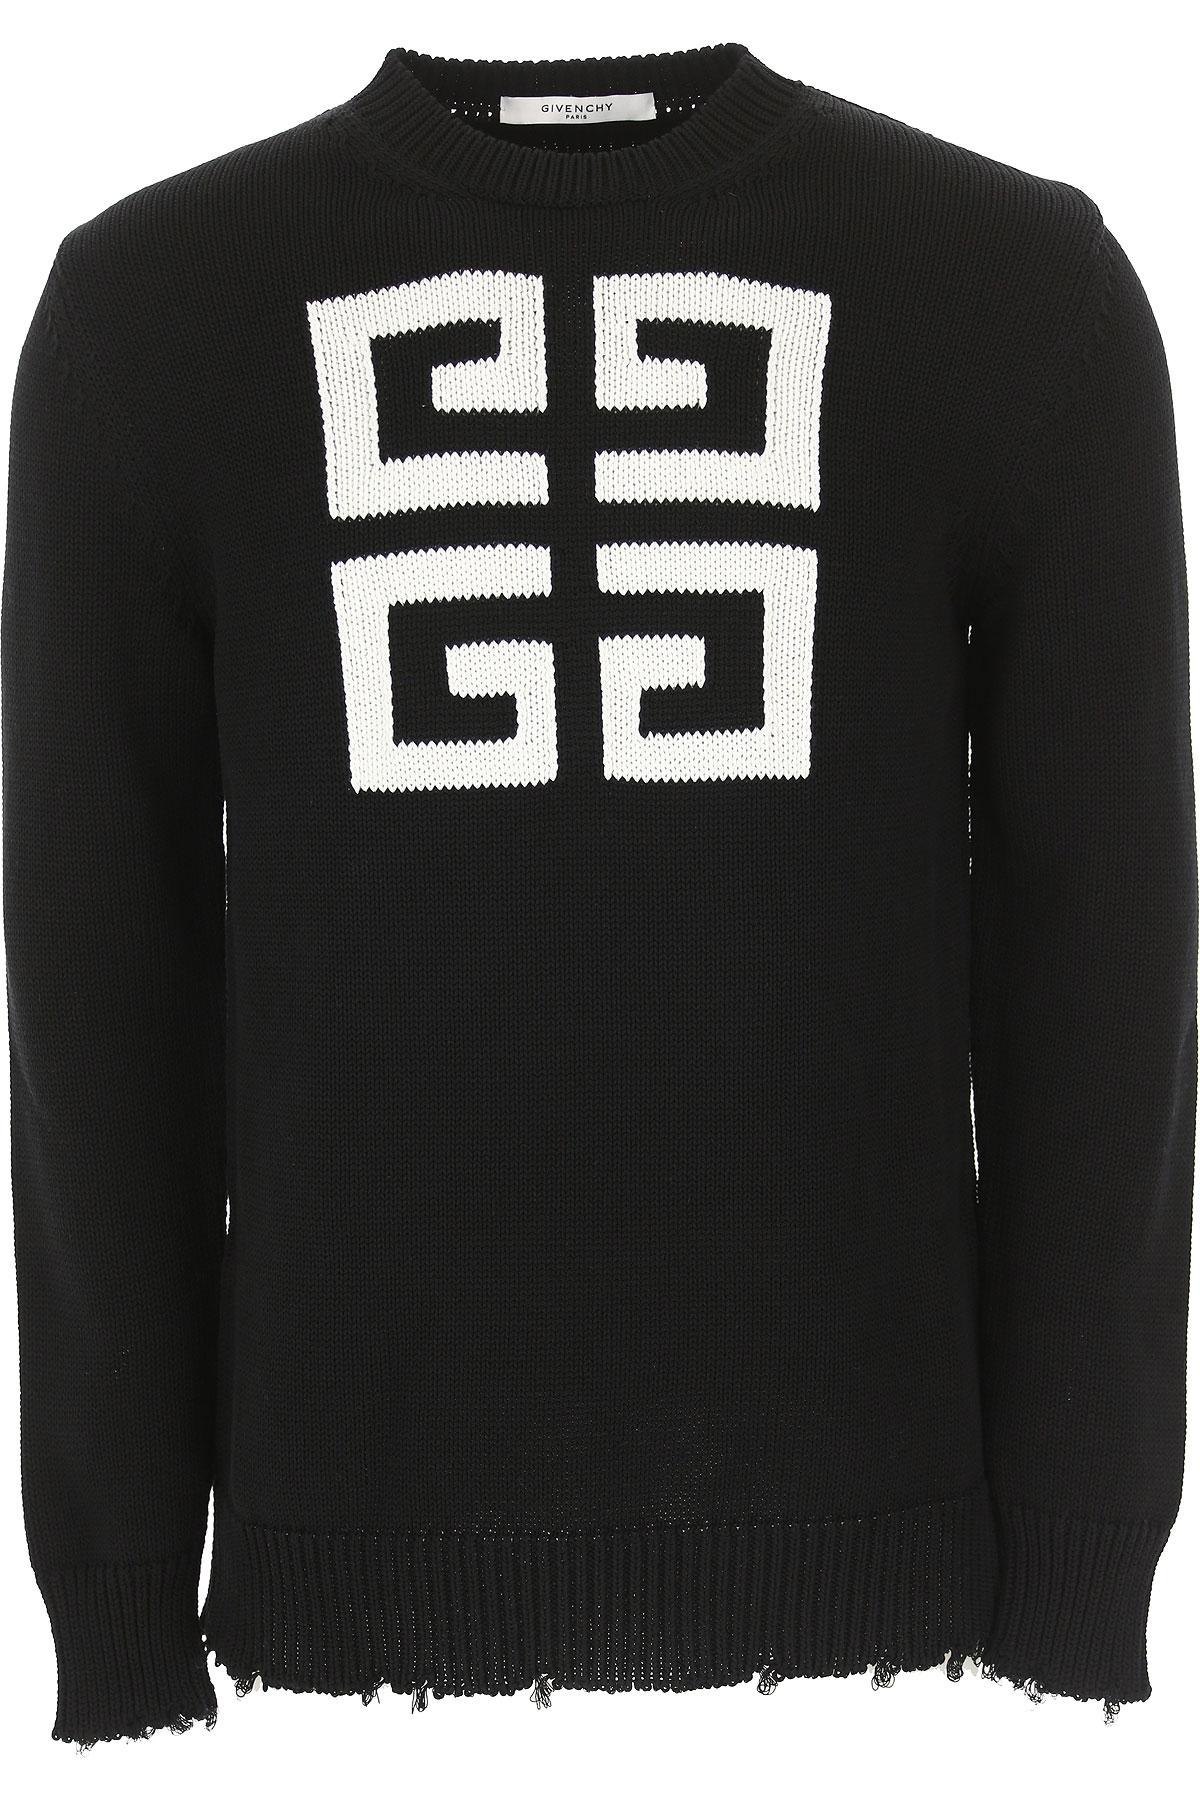 Givenchy 4g Sweater in Black/White (Black) for Men - Save 80% - Lyst